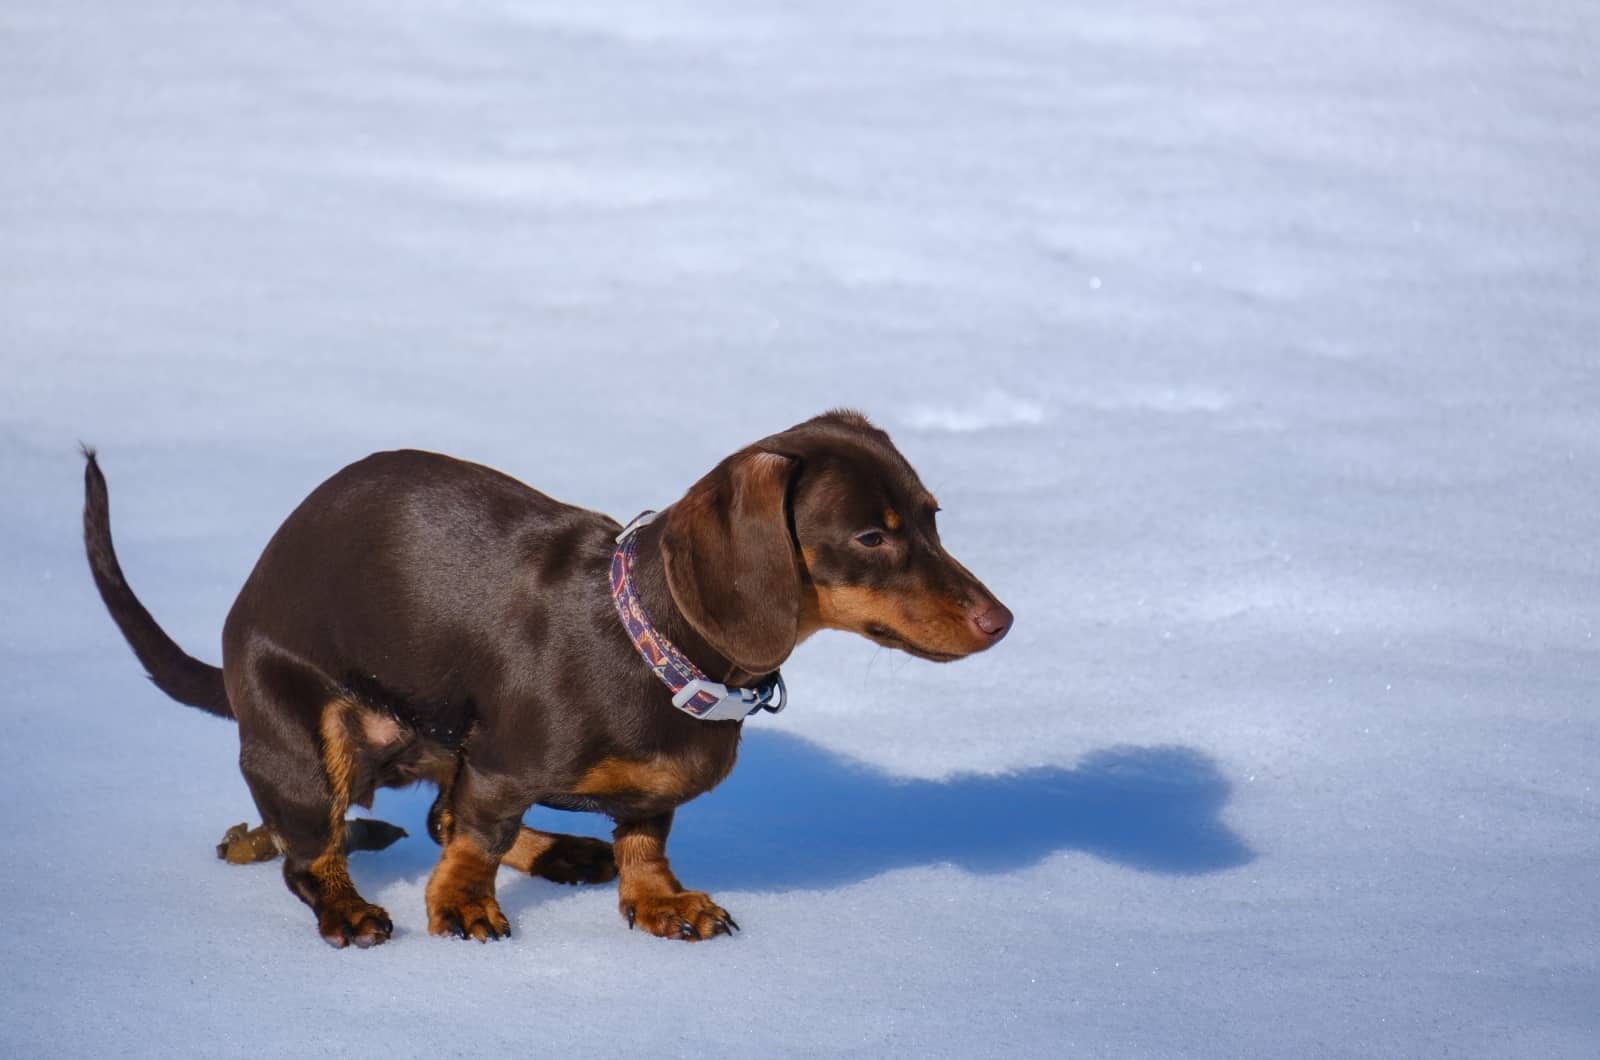 Dachshund pooping on snow